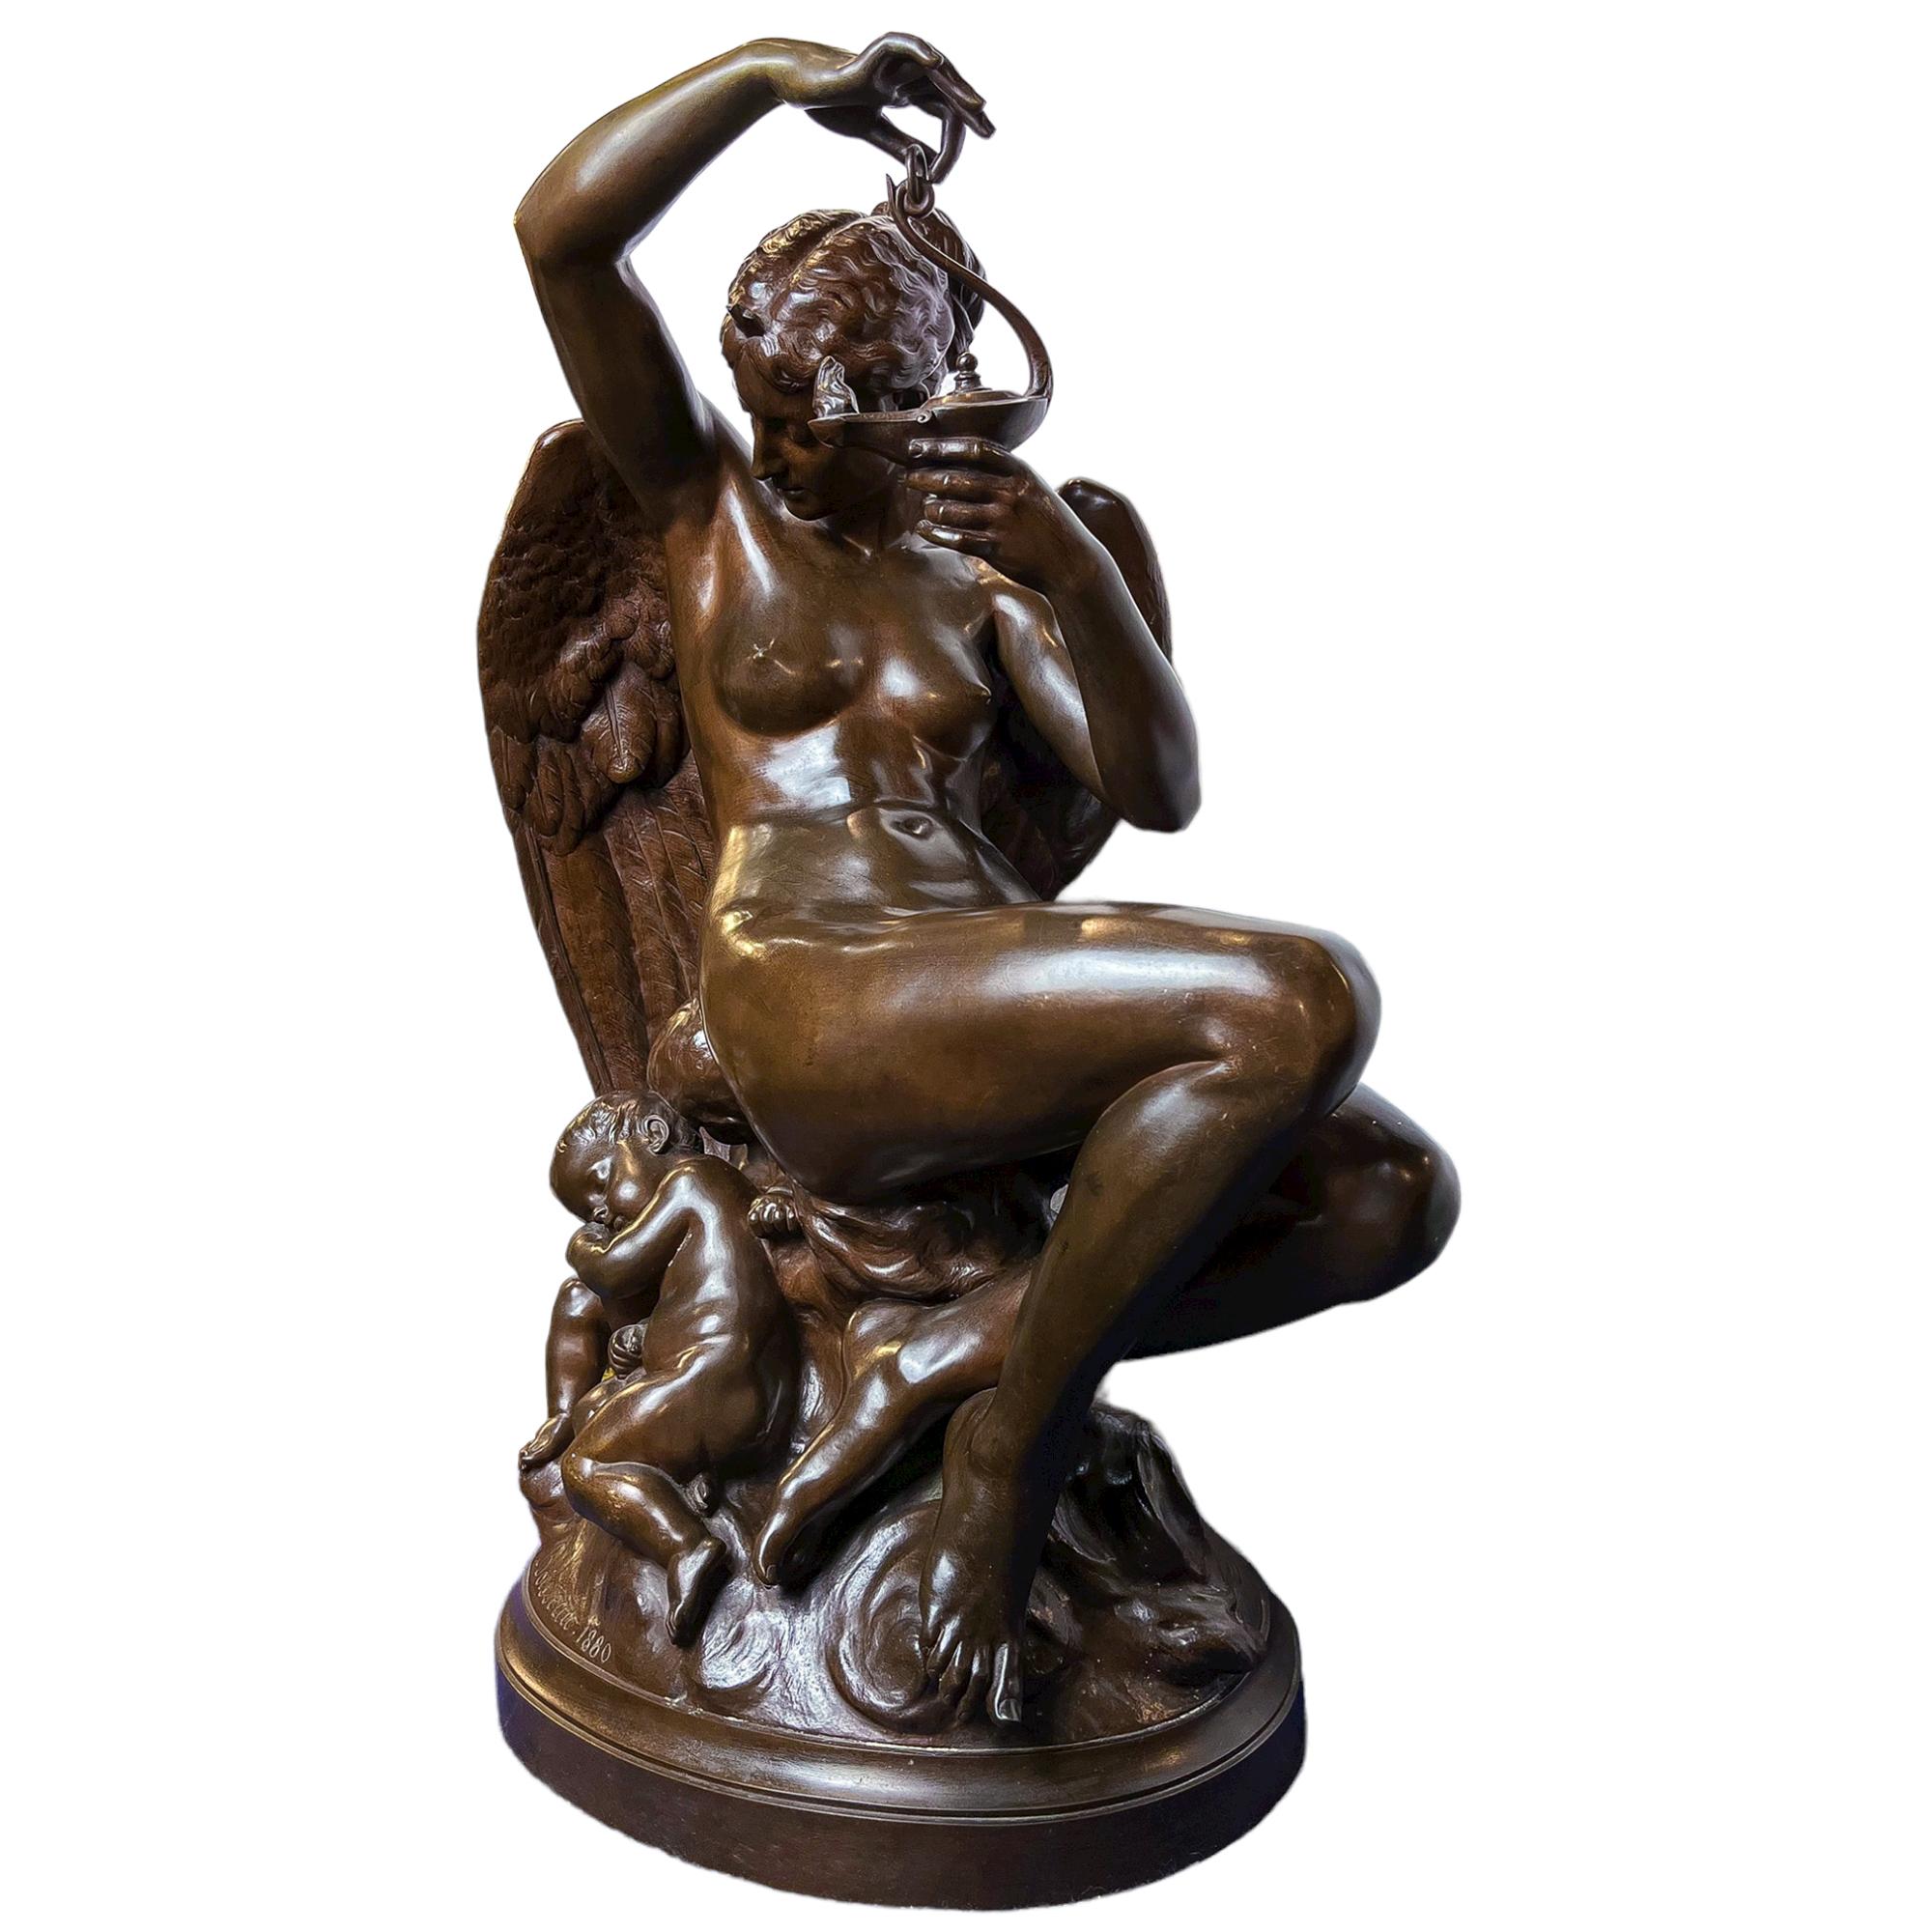 Emile-Andre Boisseau (French, 1842-1923)

Le Crépuscule

signed 'E. Boisseau' (on the base)

Bronze 

height: 29 in. (74 cm.)


Emile-André Boisseau was a regular exhibitor at the Salon from 1870, winning numerous prizes. The present